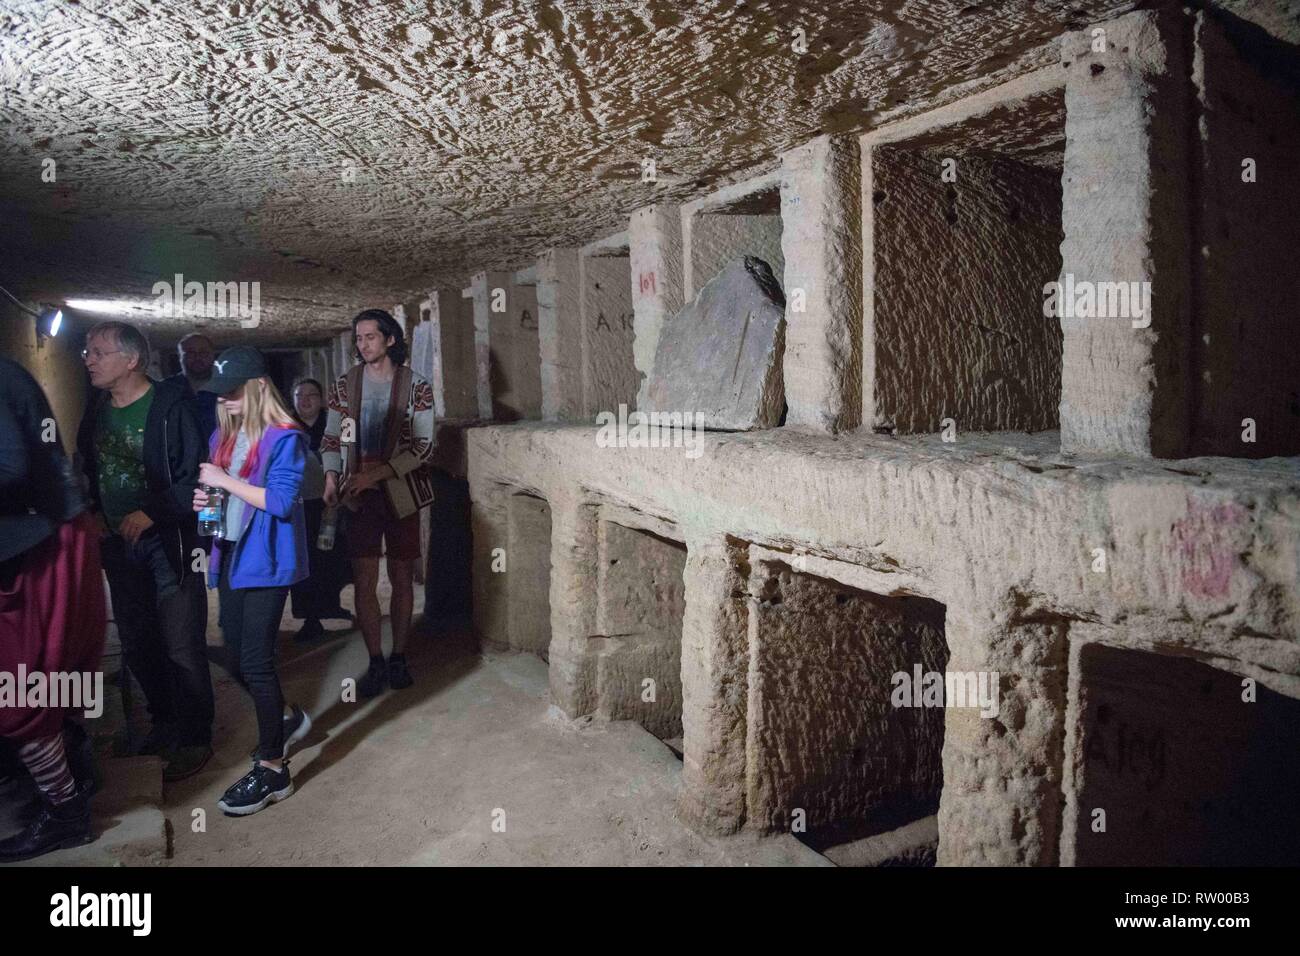 Alexandria, Egypt. 3rd Mar, 2019. People visit the catacombs of ancient Kom al-Shoqafa tombs in the northern seaside Alexandria province, Egypt, on March 3, 2019. The Egyptian Ministry of Antiquities celebrated on Sunday the completion of a project removing underground water from 2,000-year-old catacombs in the northern seaside province of Alexandria dating back to the Greco-Roman era. Credit: Wu Huiwo/Xinhua/Alamy Live News Stock Photo